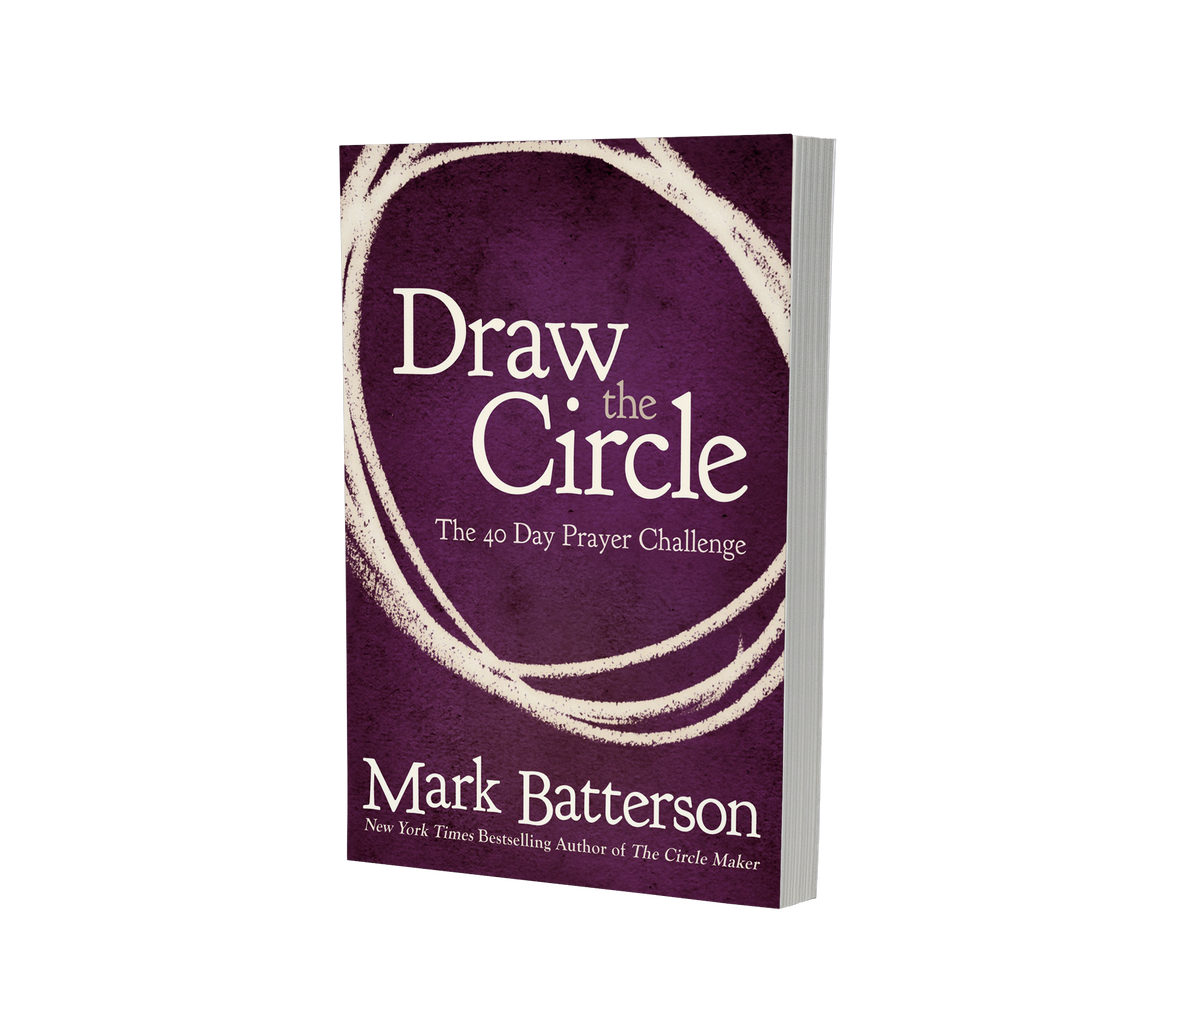 Why I Highly Recommend The Circle Maker by Mark Batterson